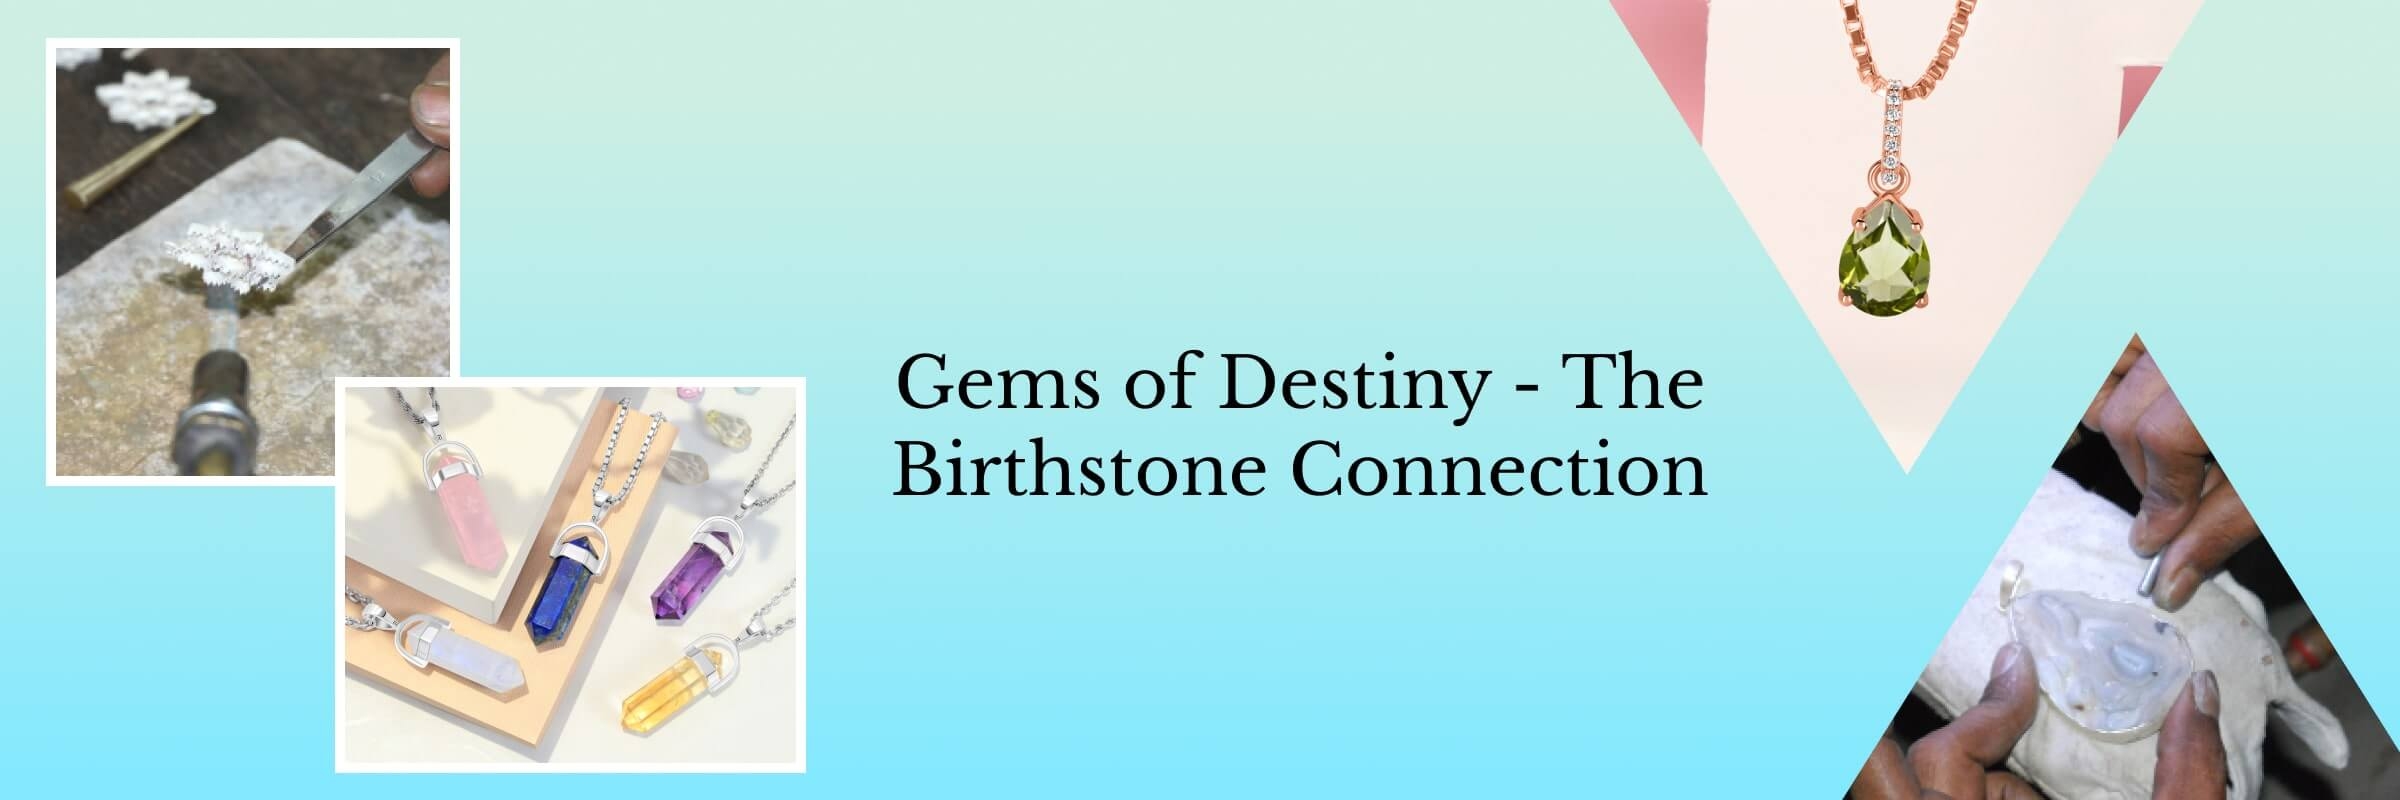 The Significance of Birthstones